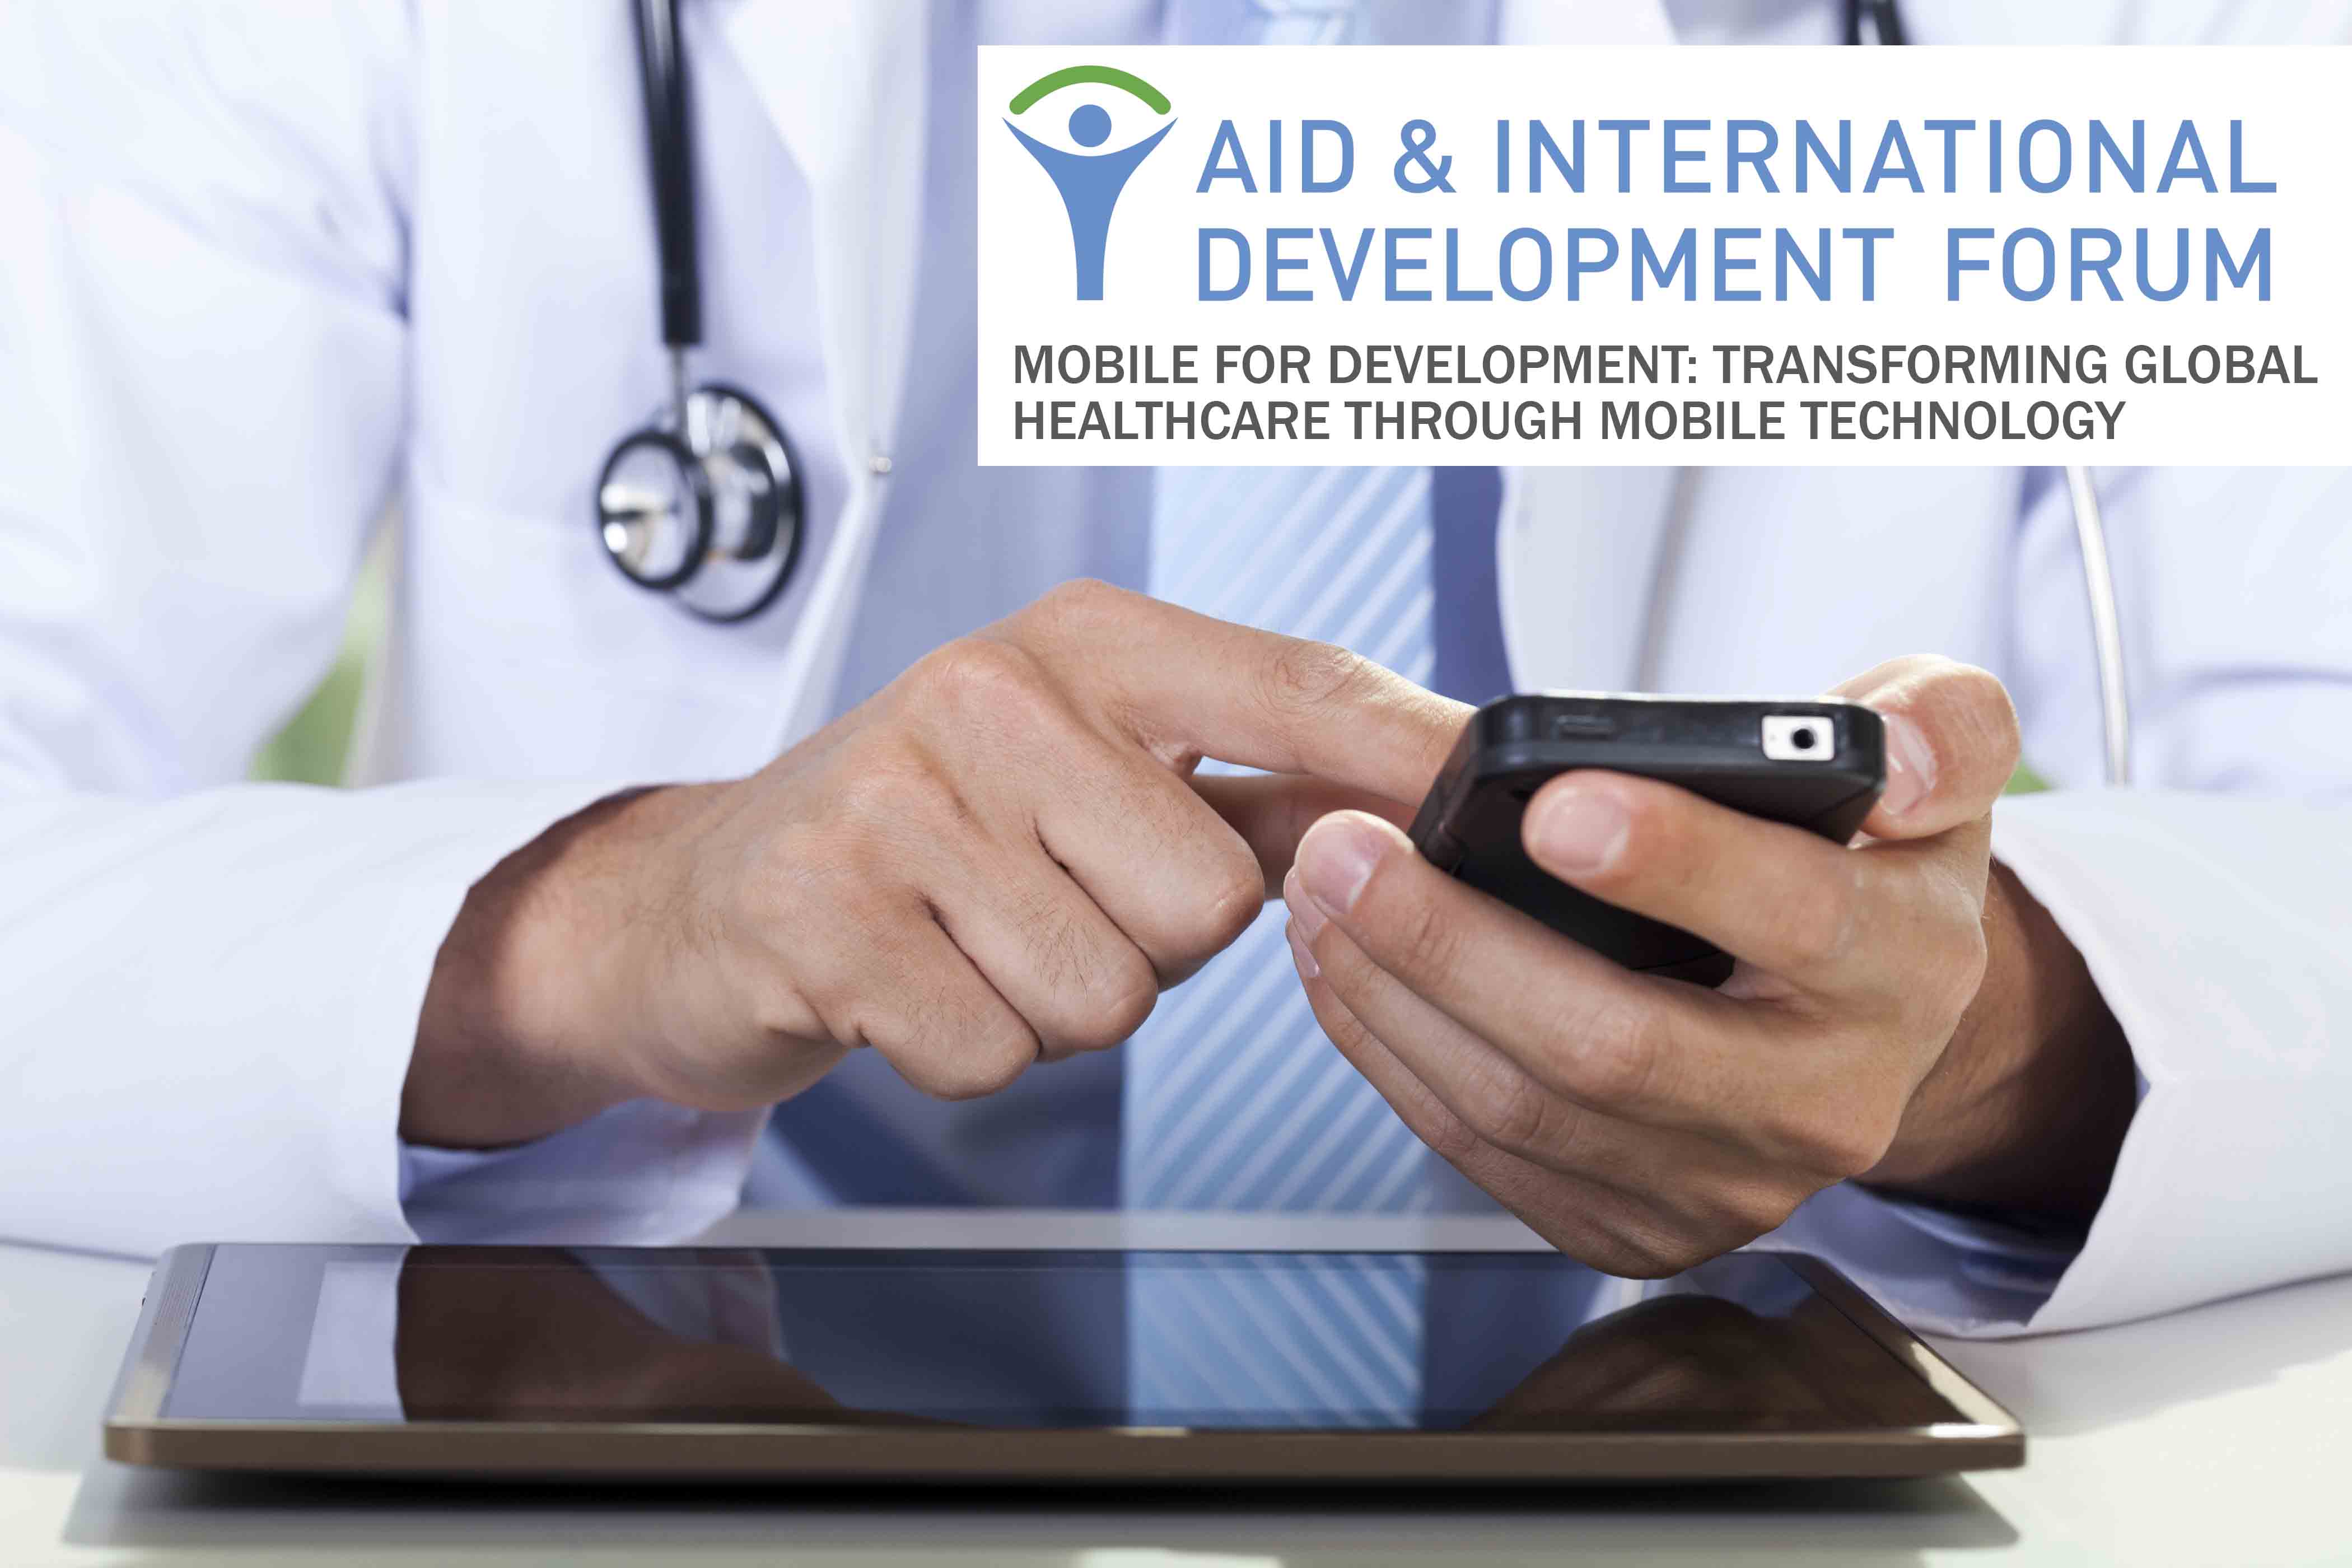 [report] Mobile for Development: Transforming Global Healthcare